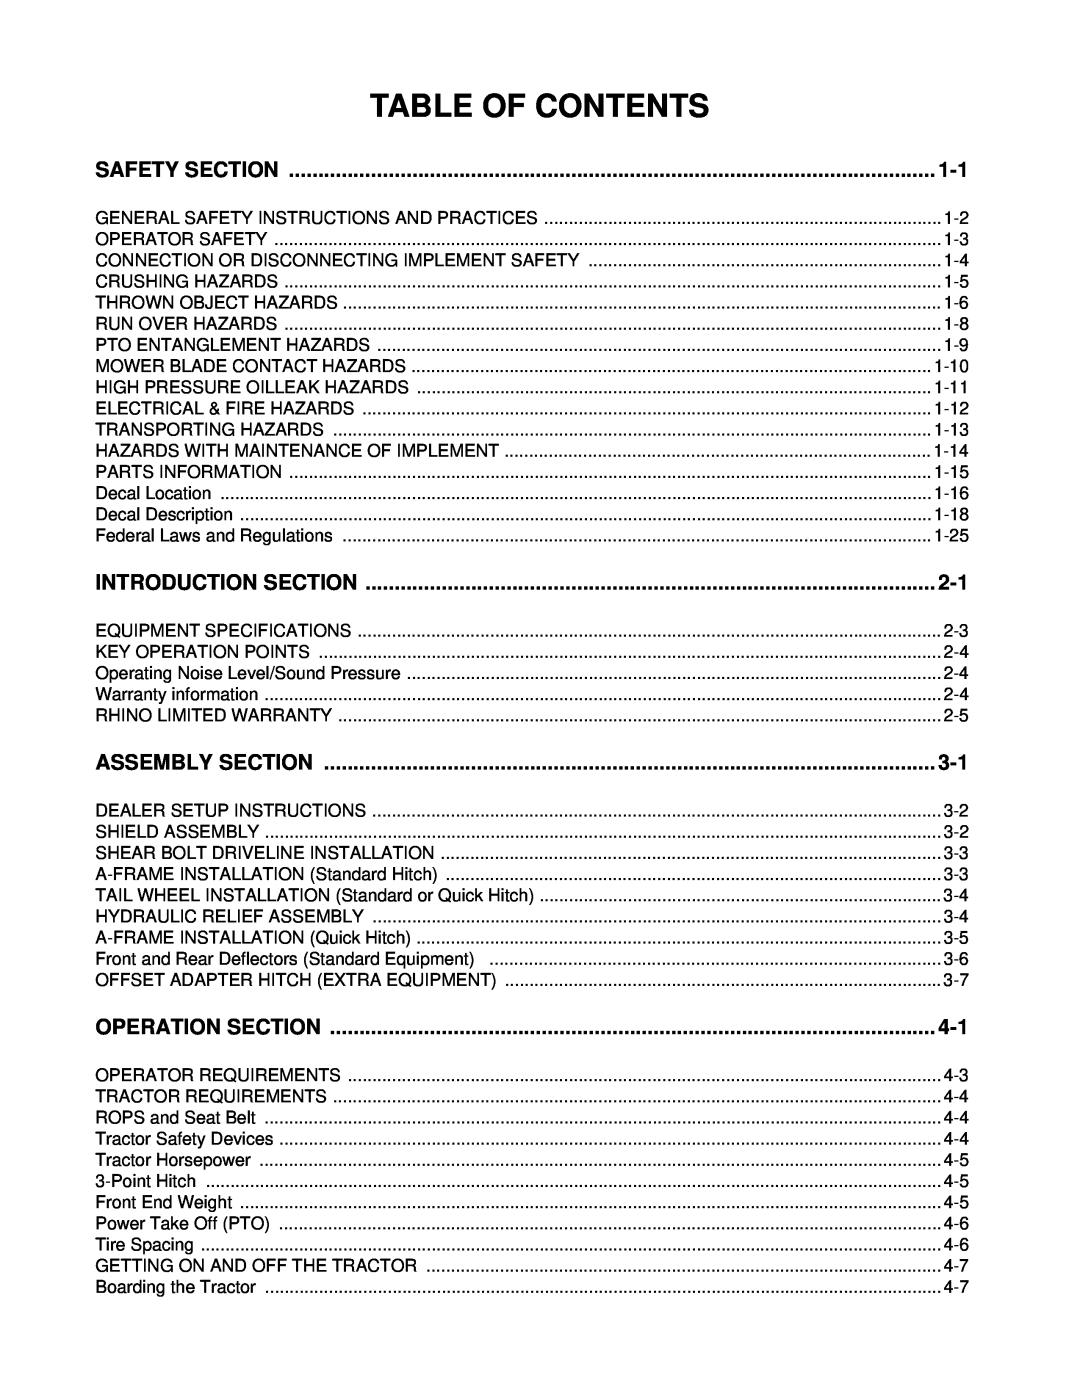 Rhino Mounts 148 manual Table Of Contents, Safety Section, Introduction Section, Assembly Section, Operation Section 